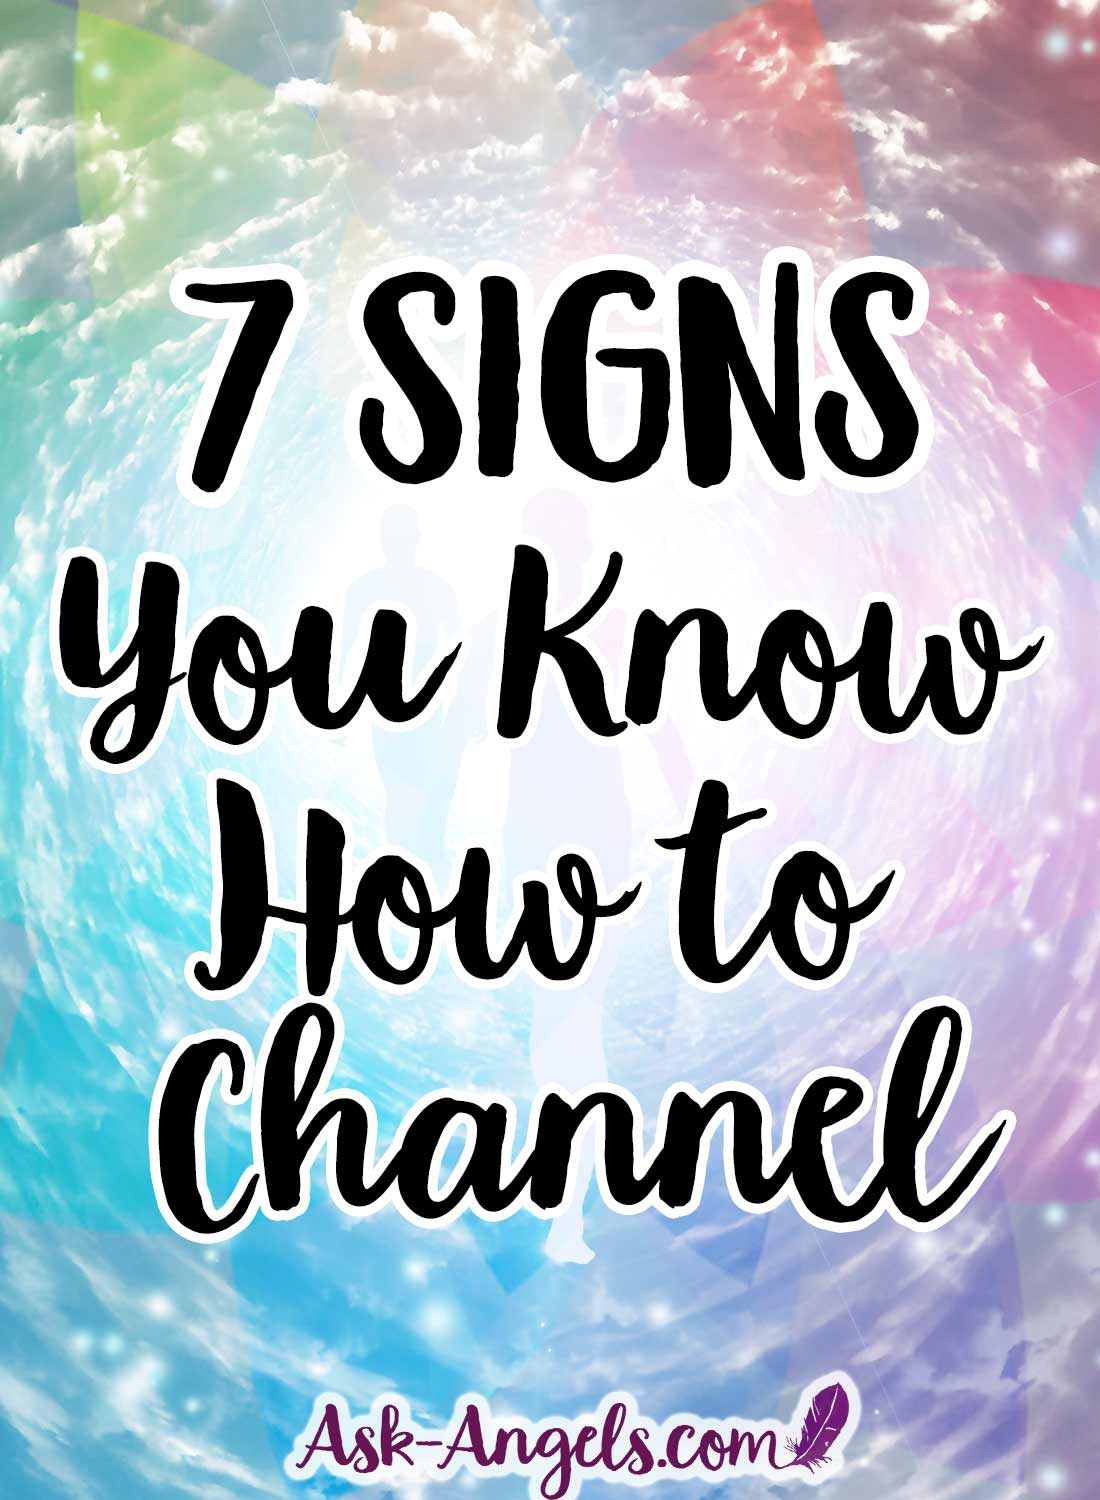 7 Signs You Know How to Channel - Spiritual Channeling